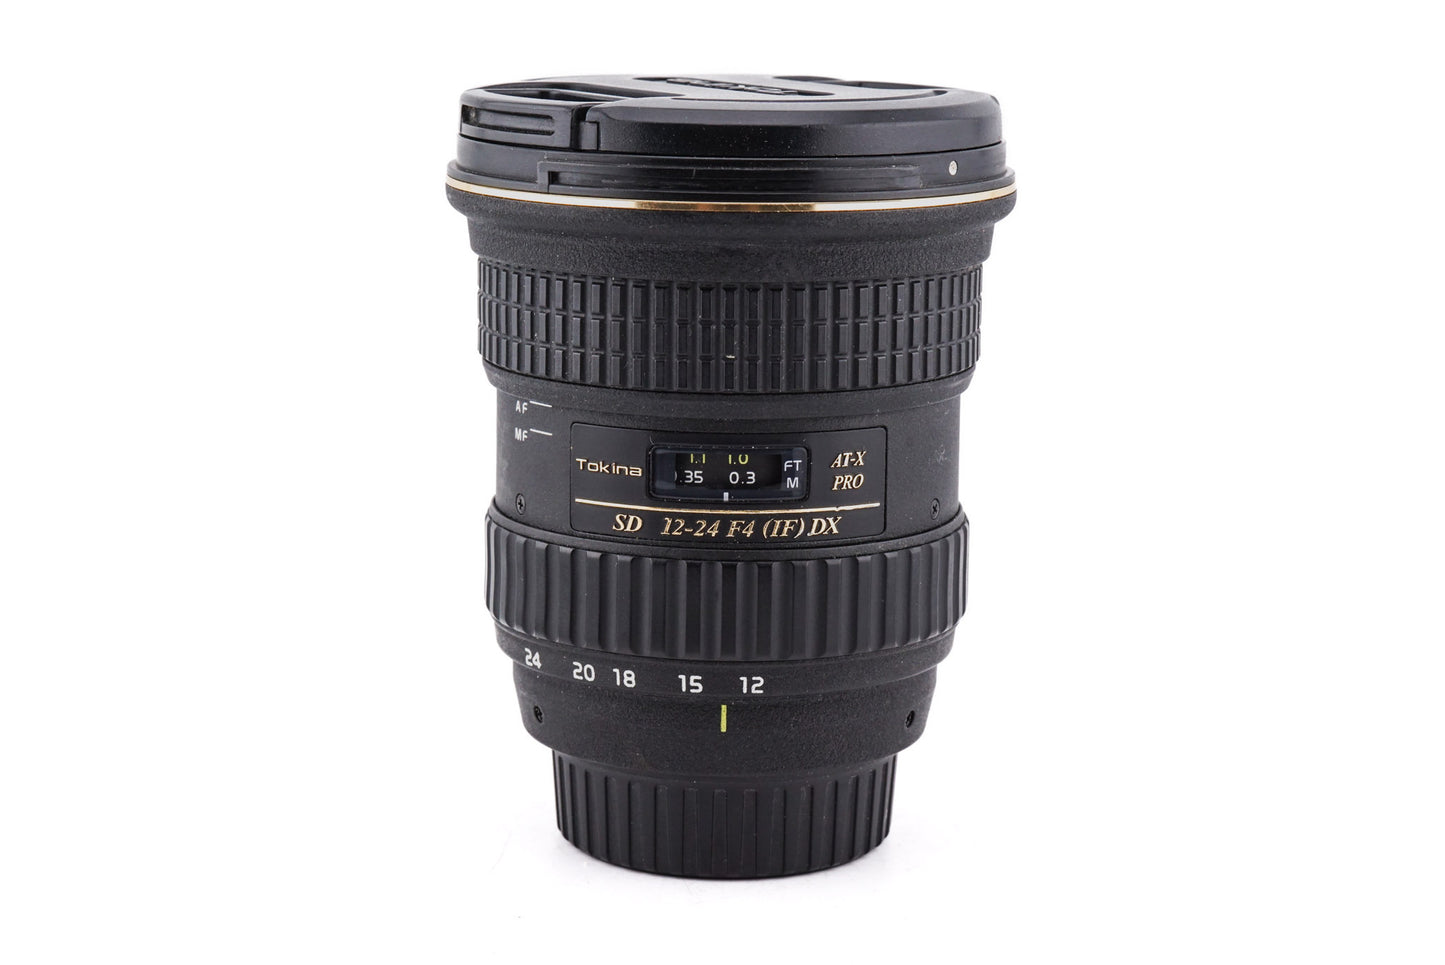 Tokina 12-24mm f4 AT-X Pro SD (IF) DX - Lens